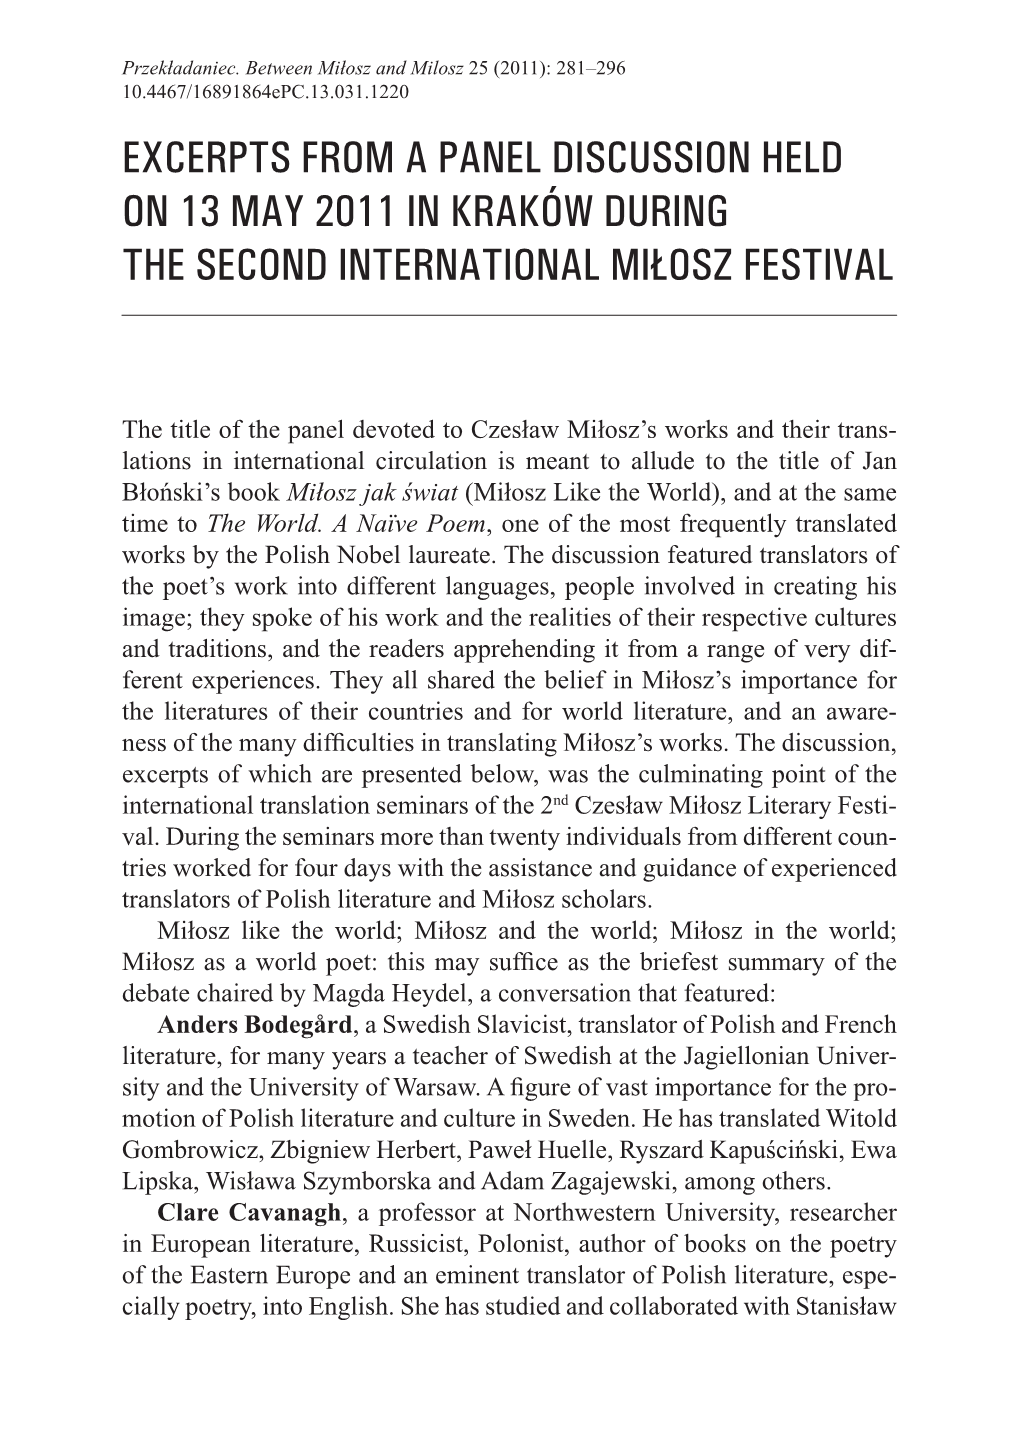 Excerpts from a Panel Discussion Held on 13 May 2011 in Kraków During the Second International Miłosz Festival